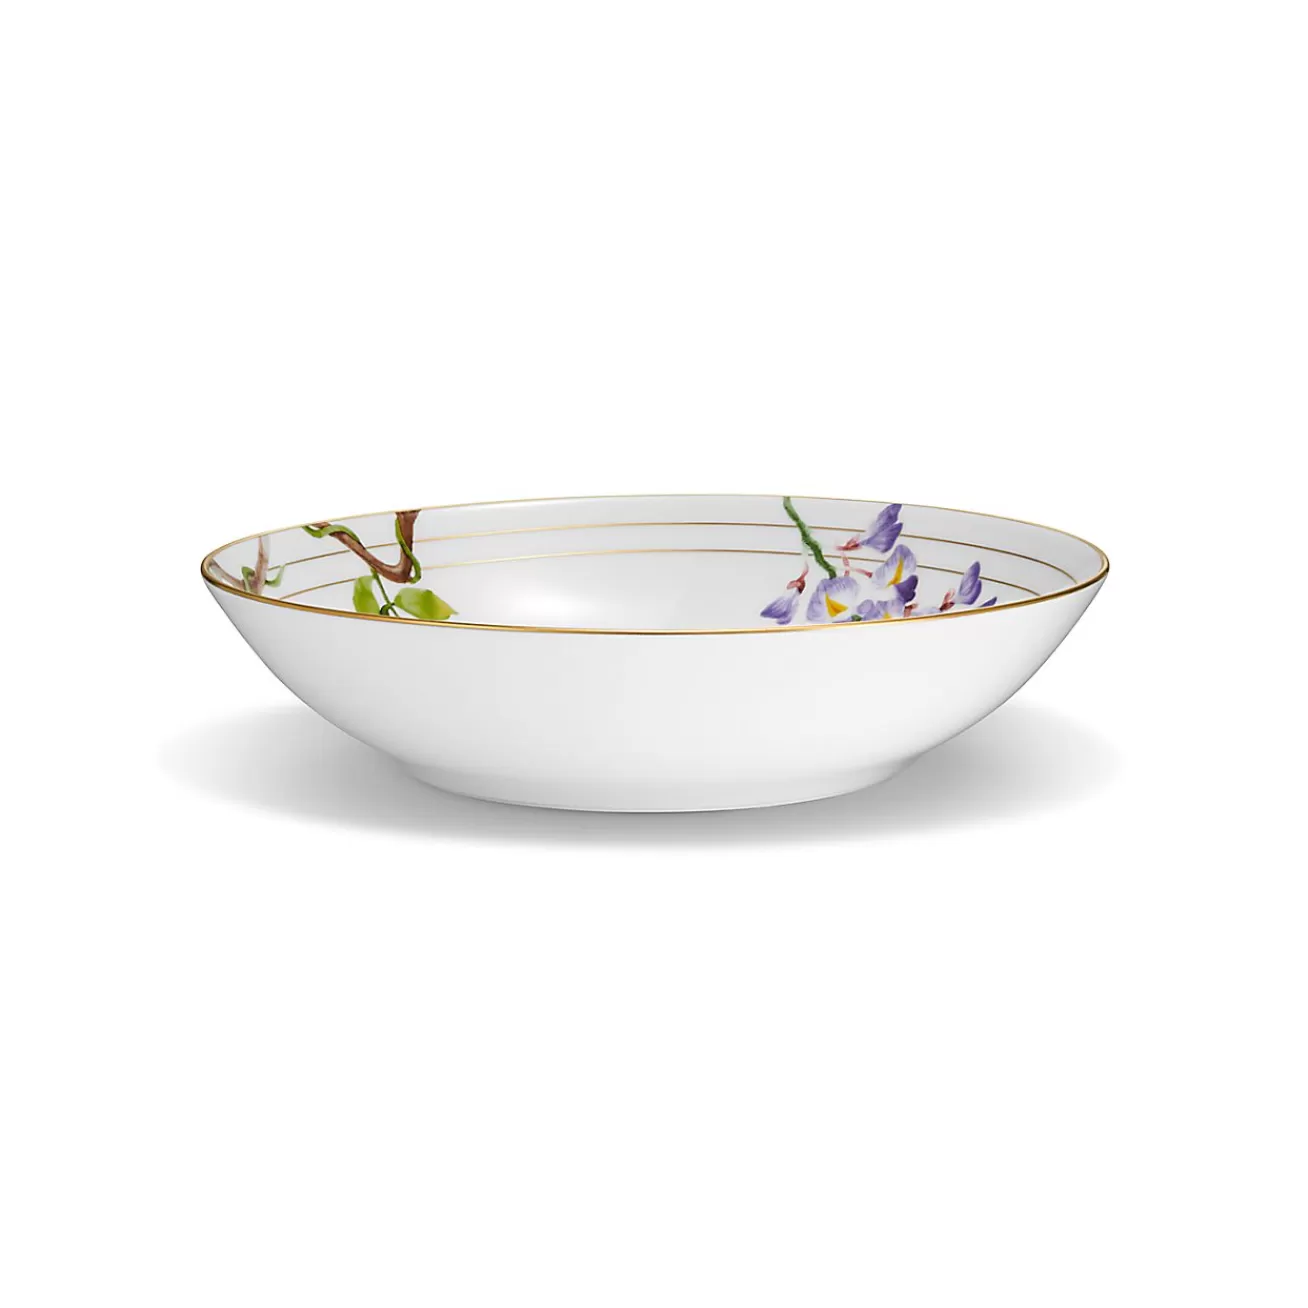 Tiffany & Co. Tiffany Wisteria Bowl in Porcelain | ^ The Home | Housewarming Gifts